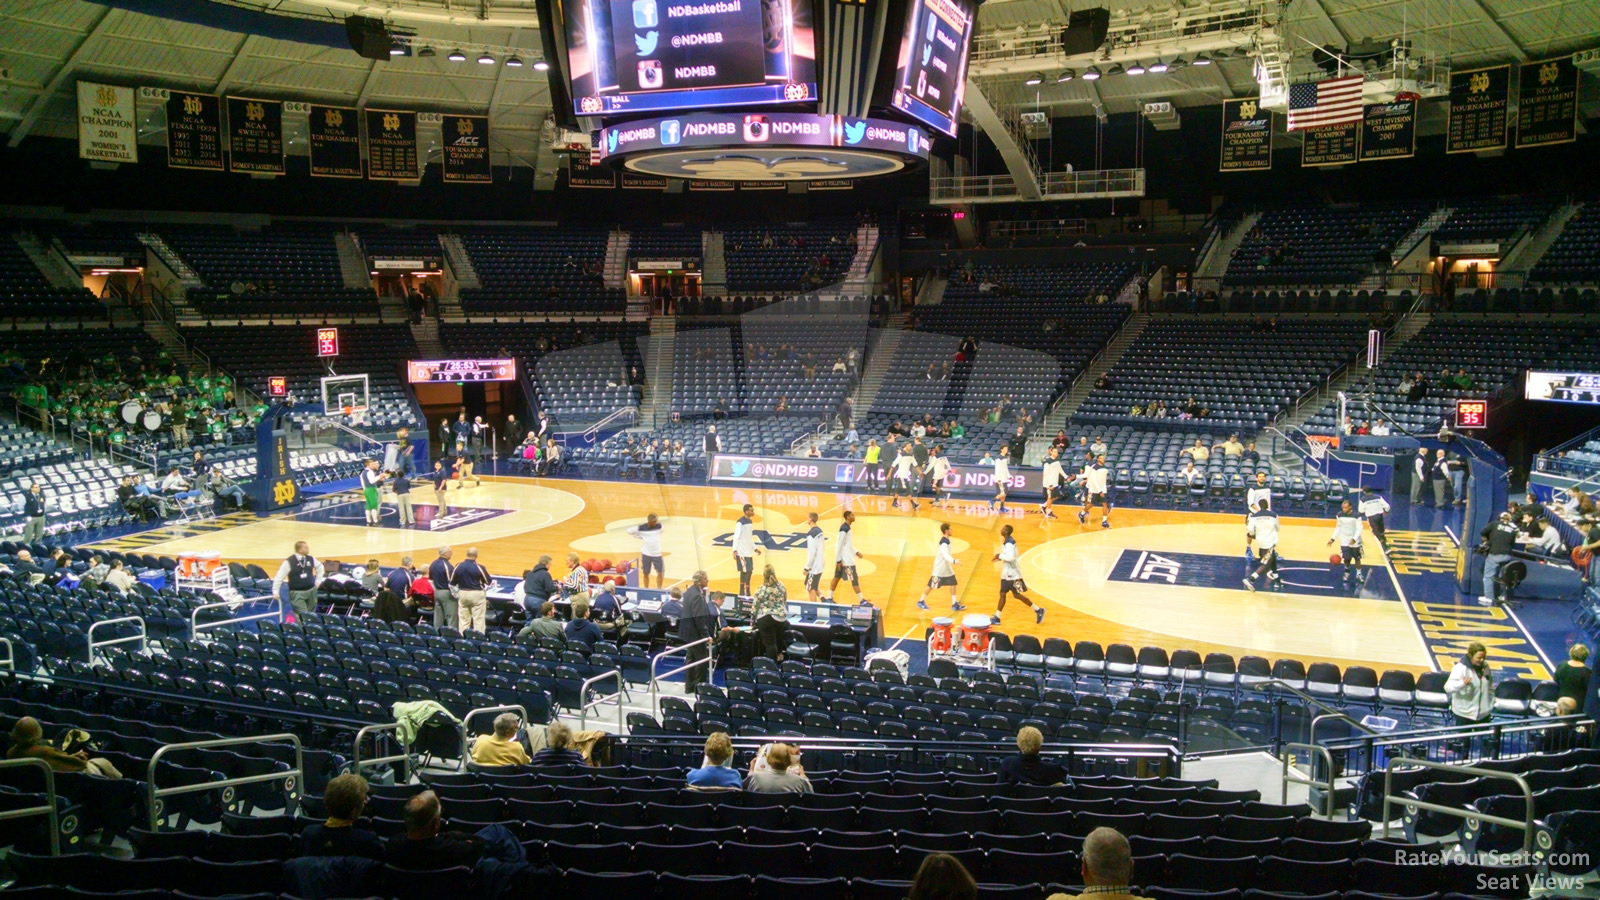 section 18, row 15 seat view  - joyce center